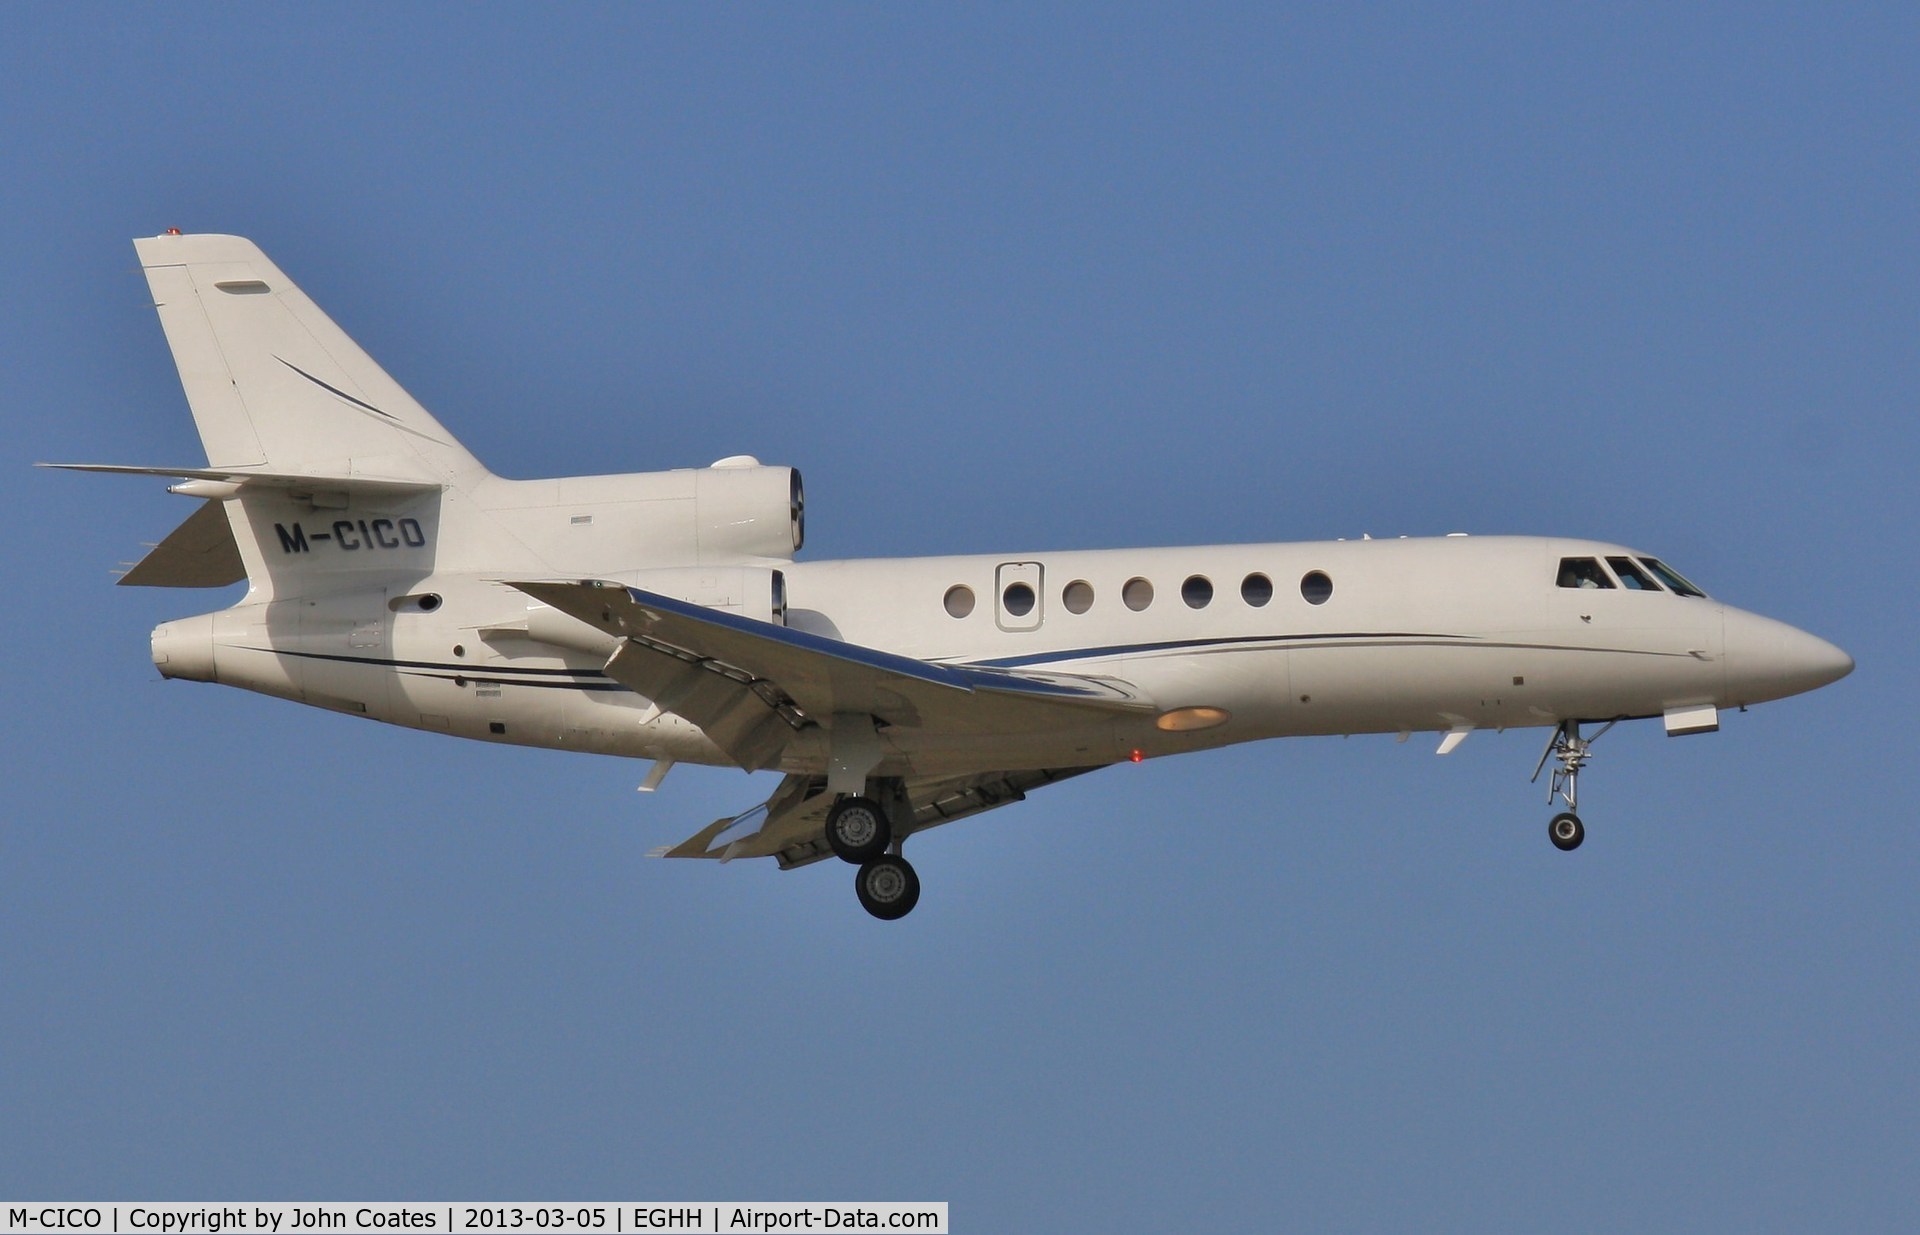 M-CICO, 2005 Dassault Falcon 50EX C/N 345, About to land 08